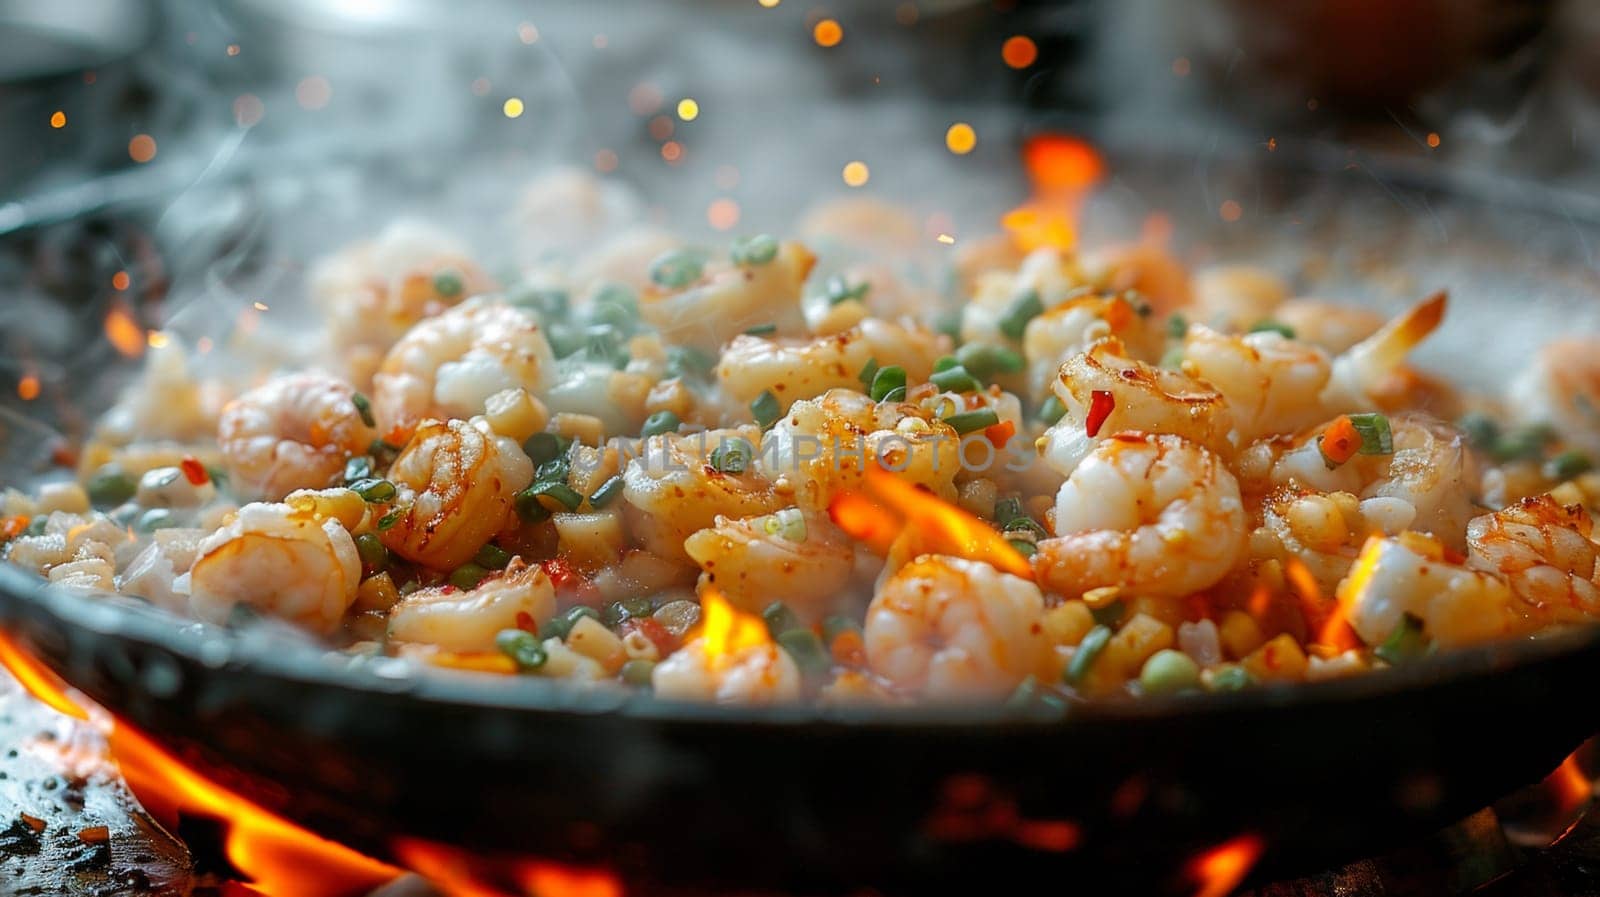 A pan of a wok filled with shrimp and vegetables on fire